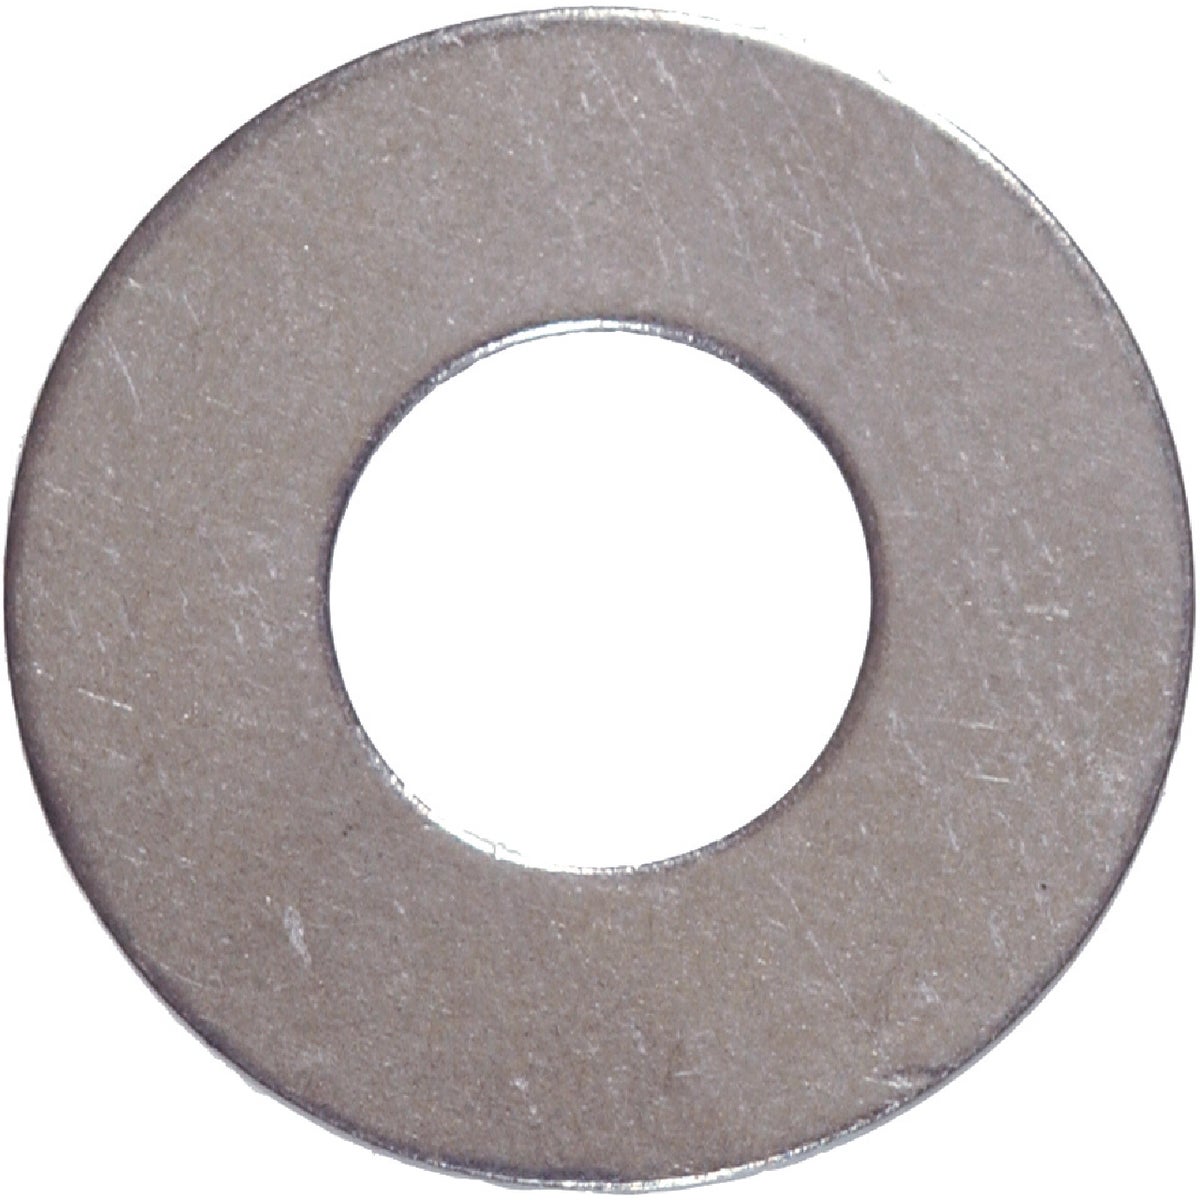 Item 728721, Stainless steel flat washer is used to spread the load of a screwed 